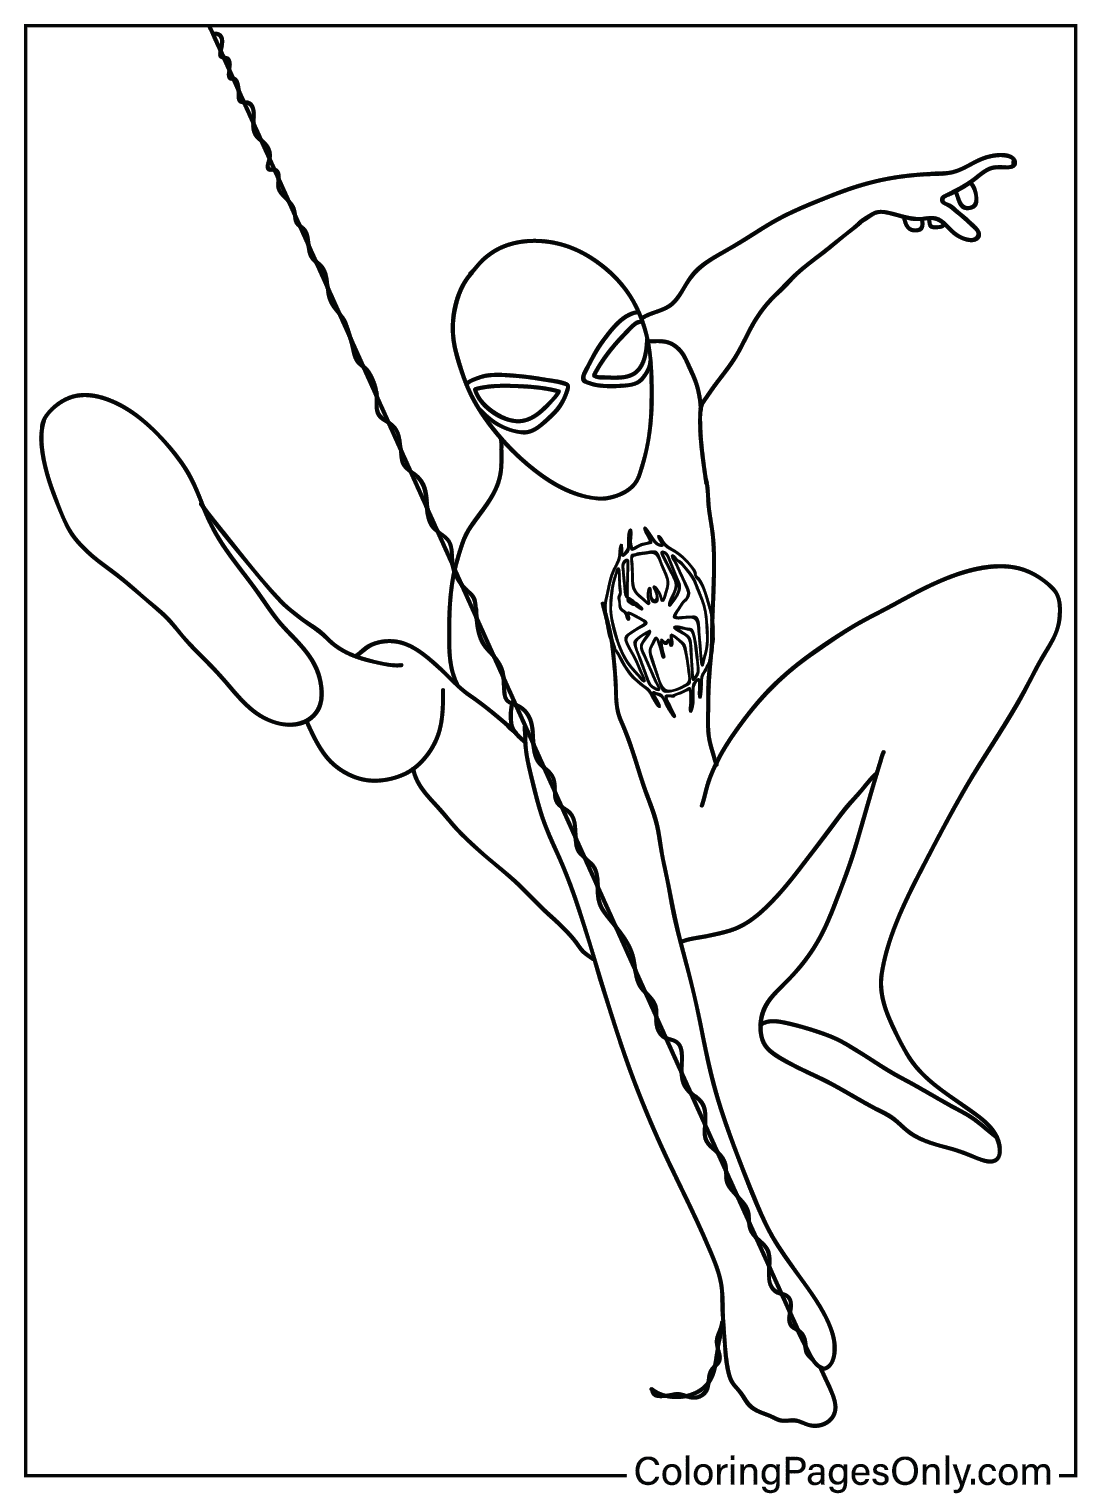 Spider-Man Across the Spider Coloring Pages to for Kids from Spider-Man: Across the Spider